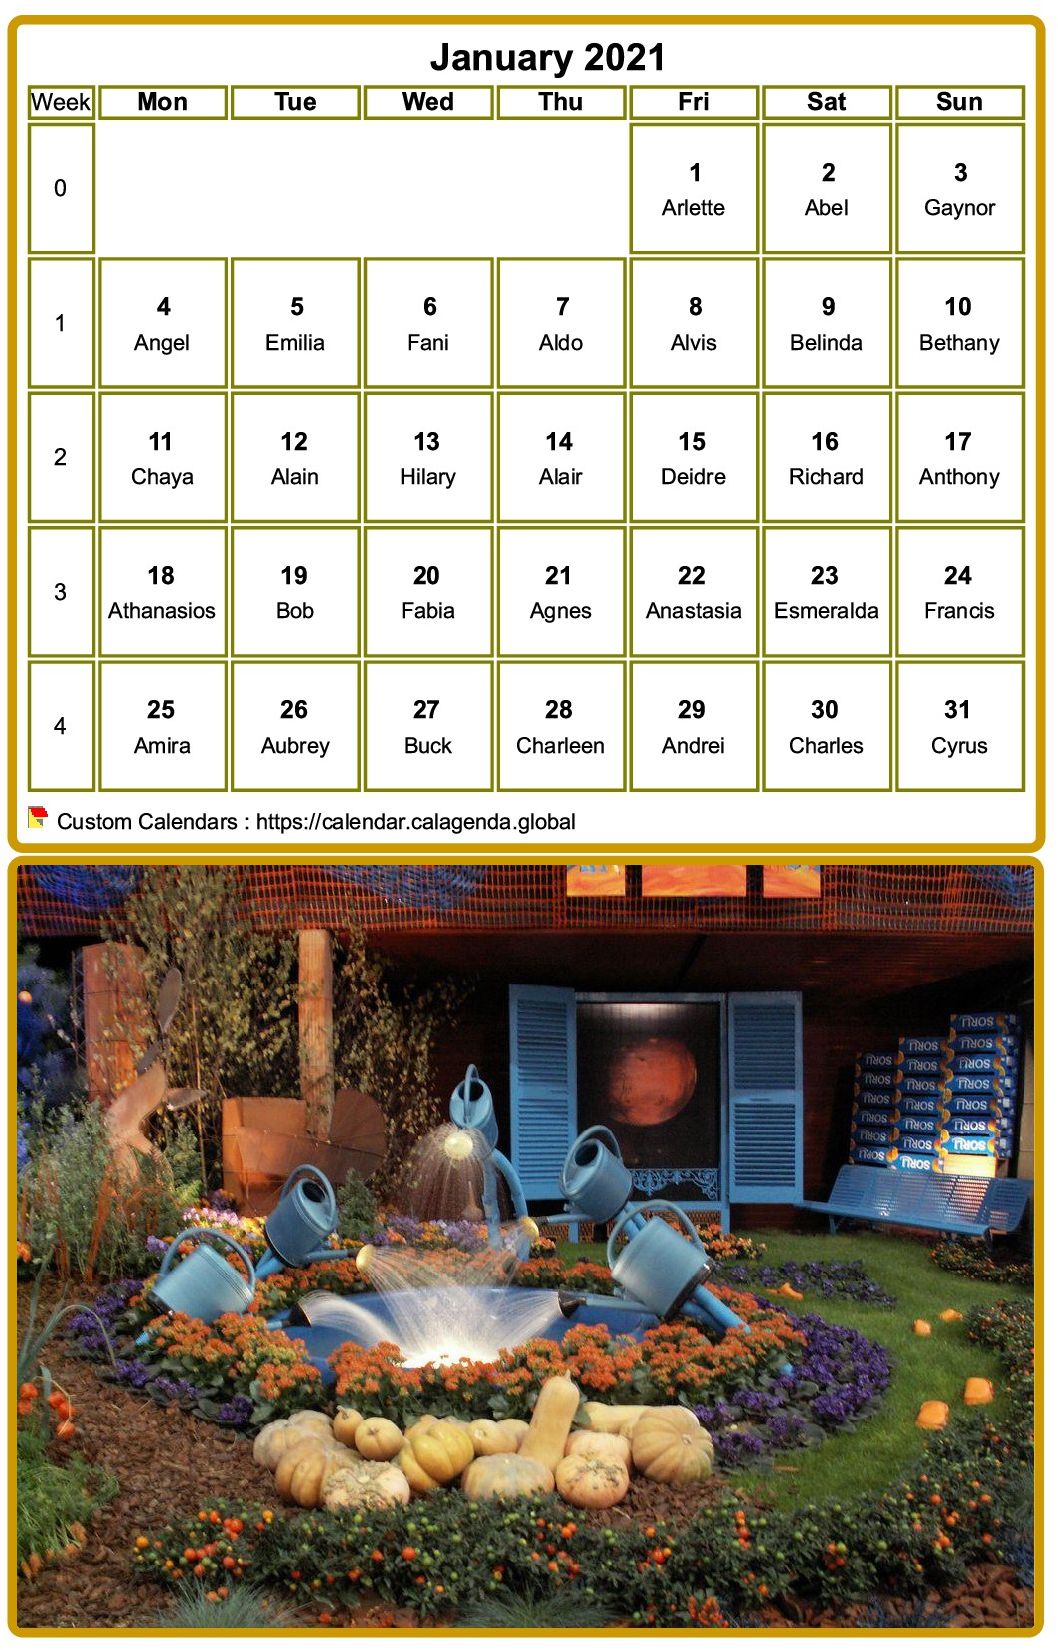 Calendar monthly 2021 to print, with photograph in underside